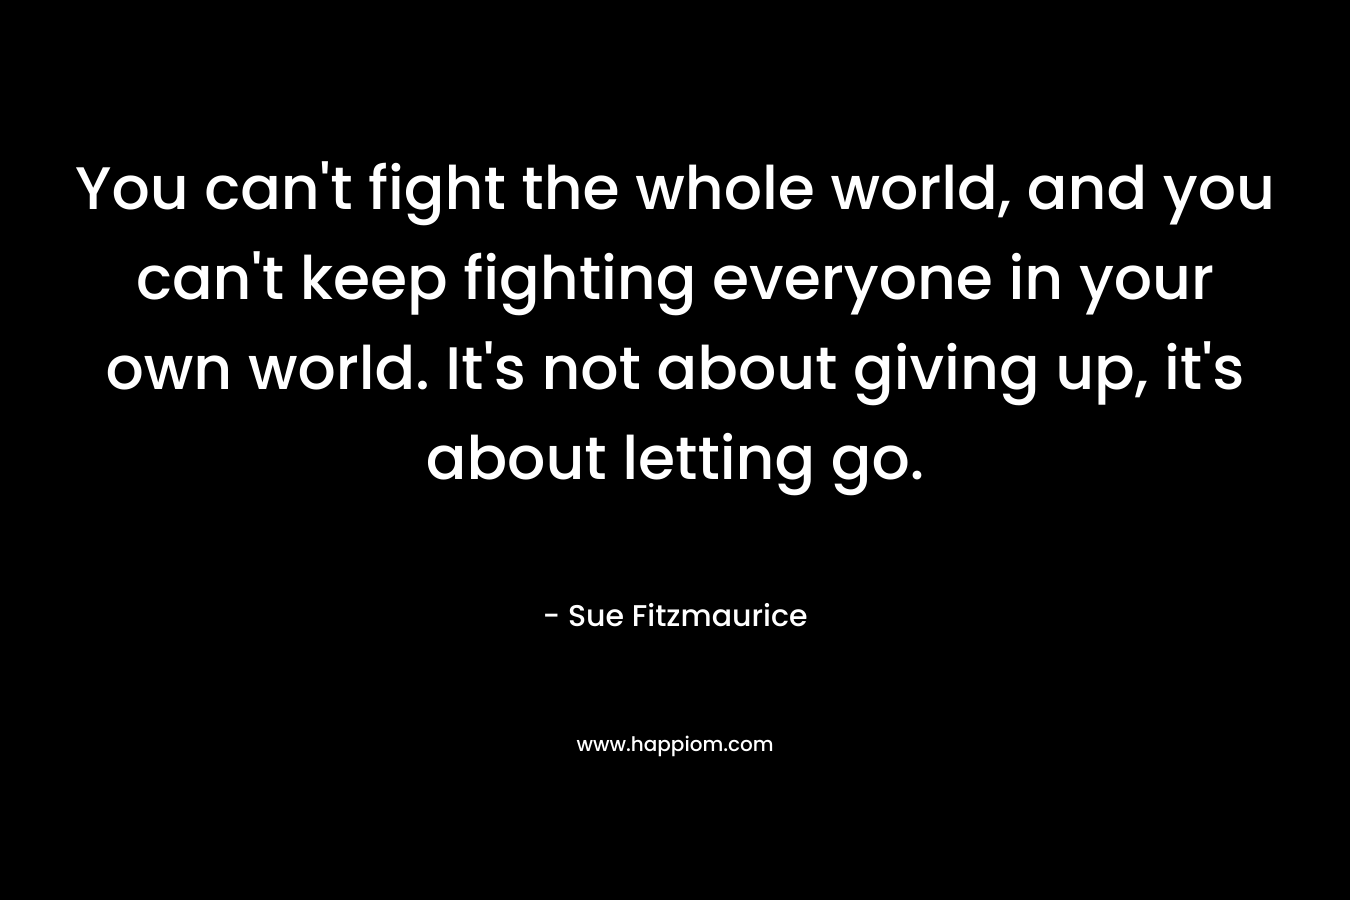 You can’t fight the whole world, and you can’t keep fighting everyone in your own world. It’s not about giving up, it’s about letting go. – Sue Fitzmaurice